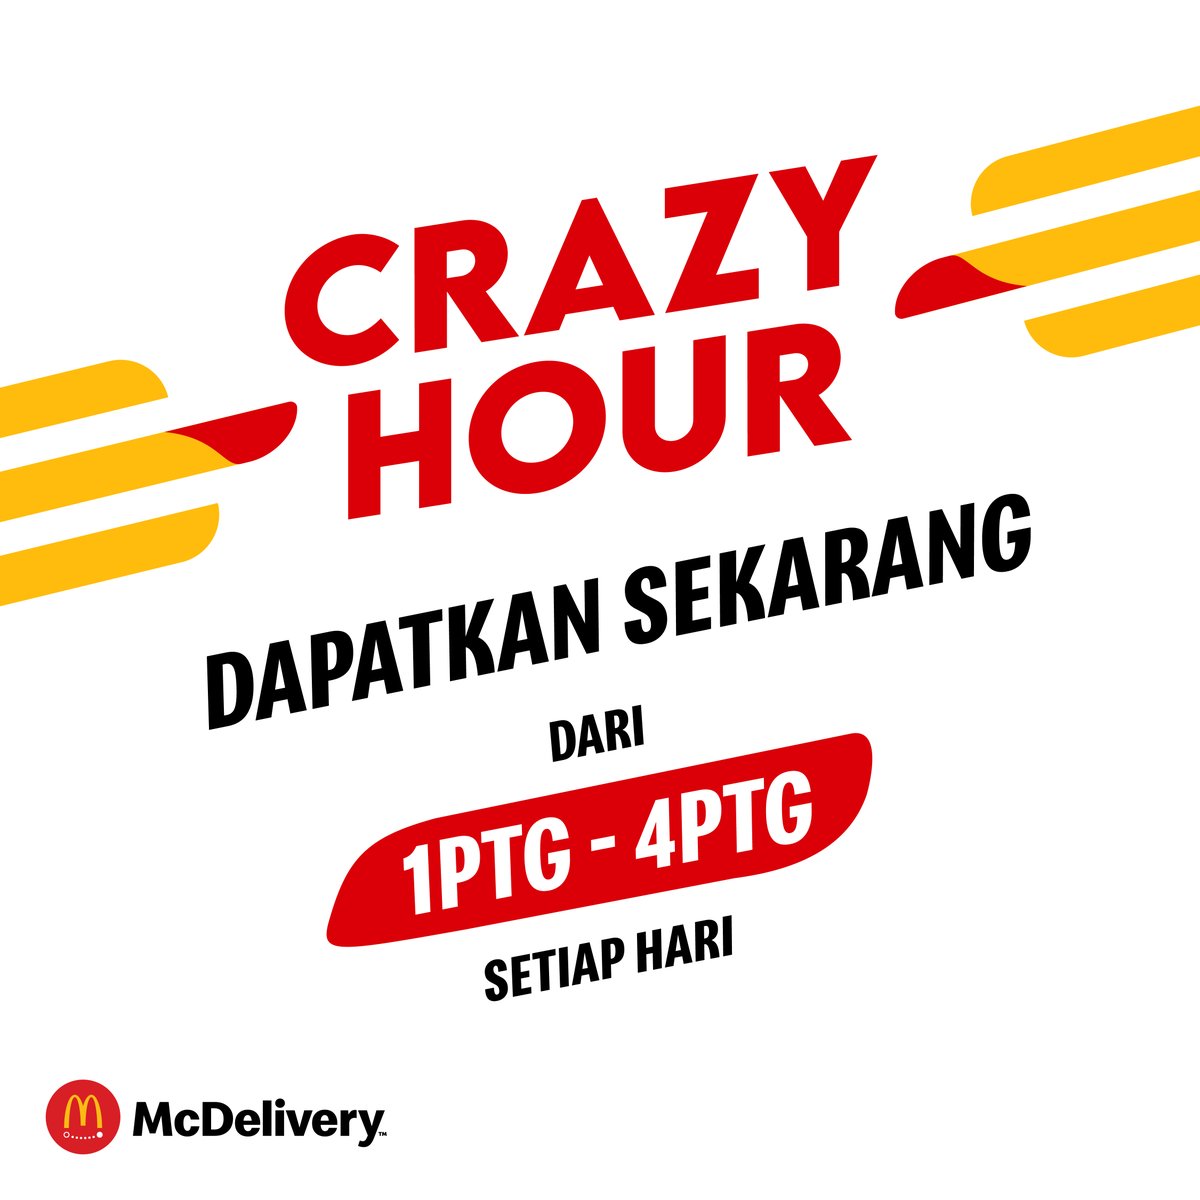 Hour mcdelivery crazy Visit our